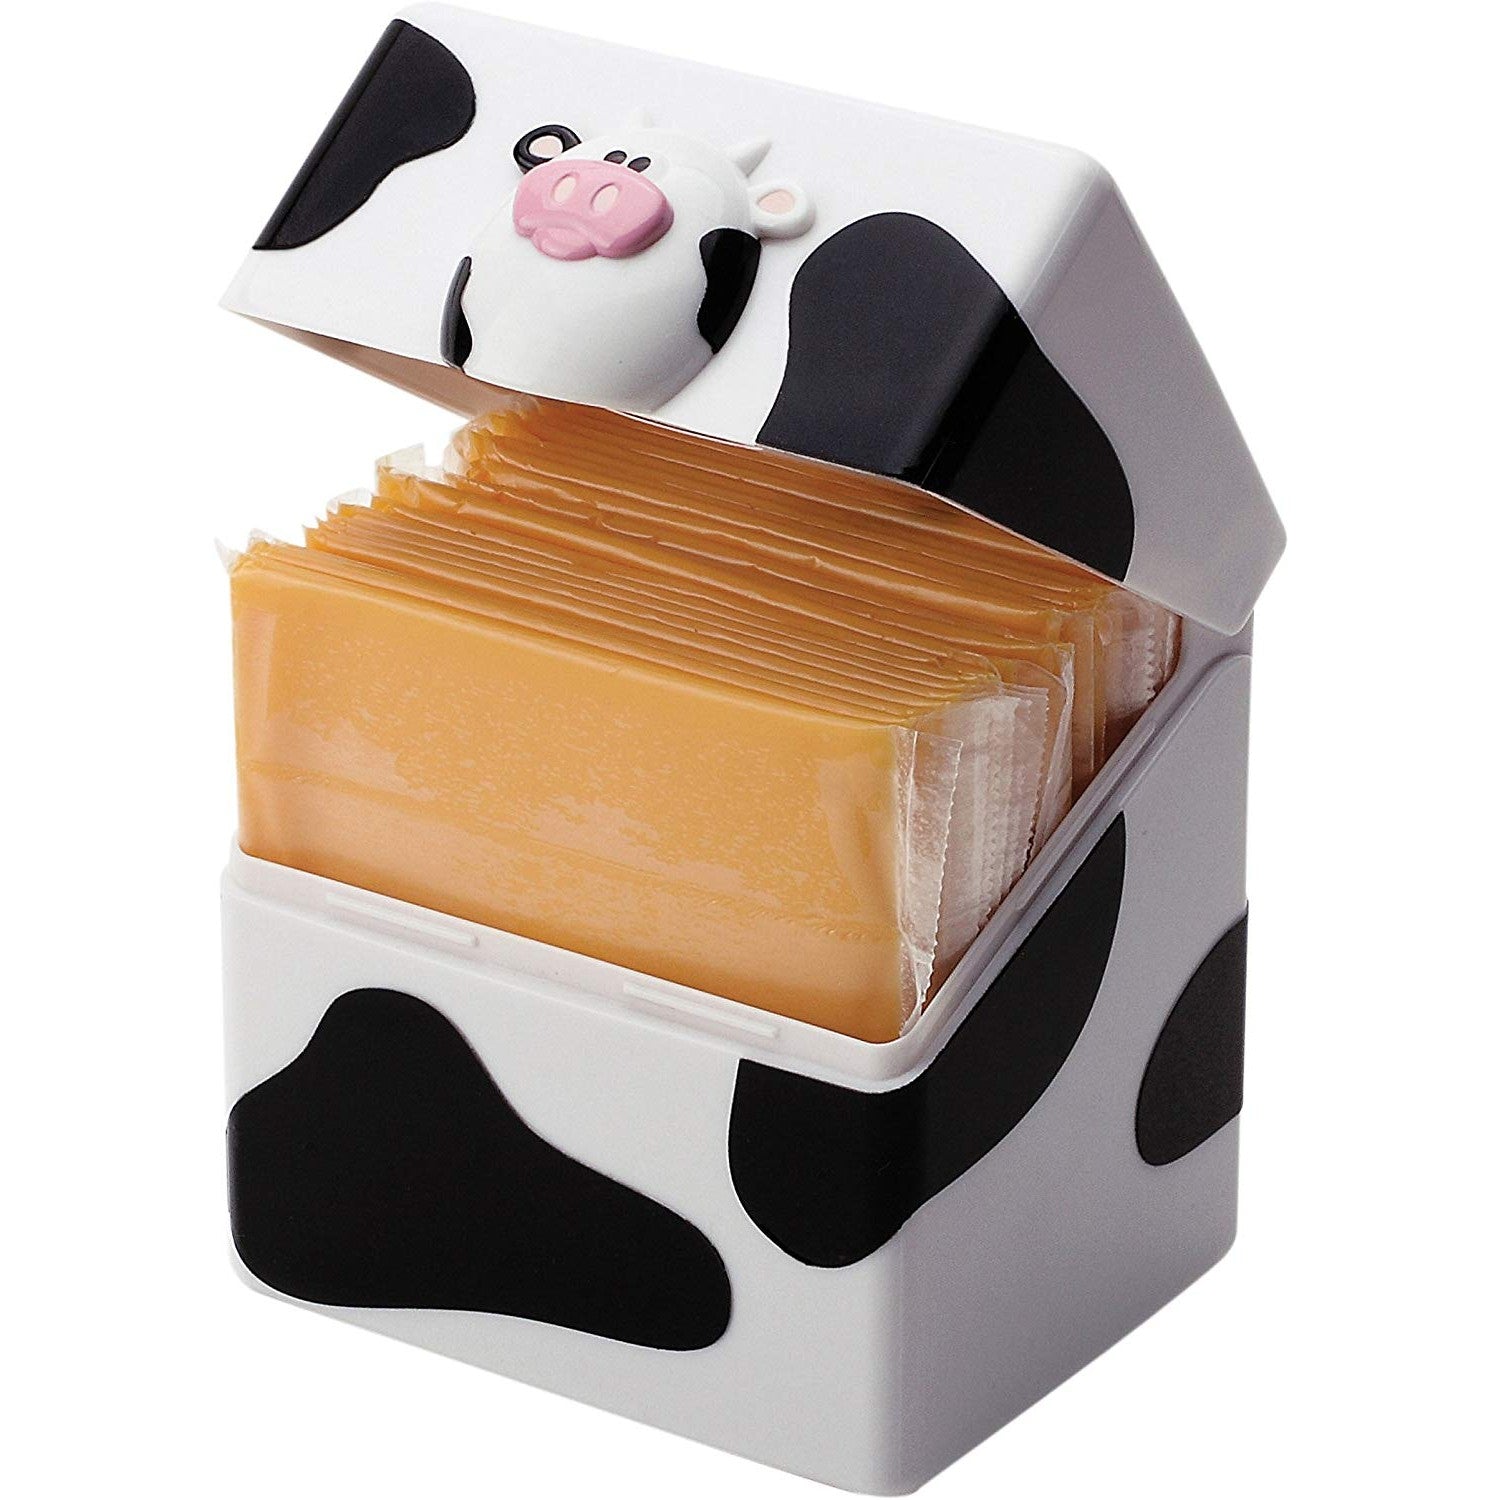 Cow Cheese Slice Holder - oddgifts.com